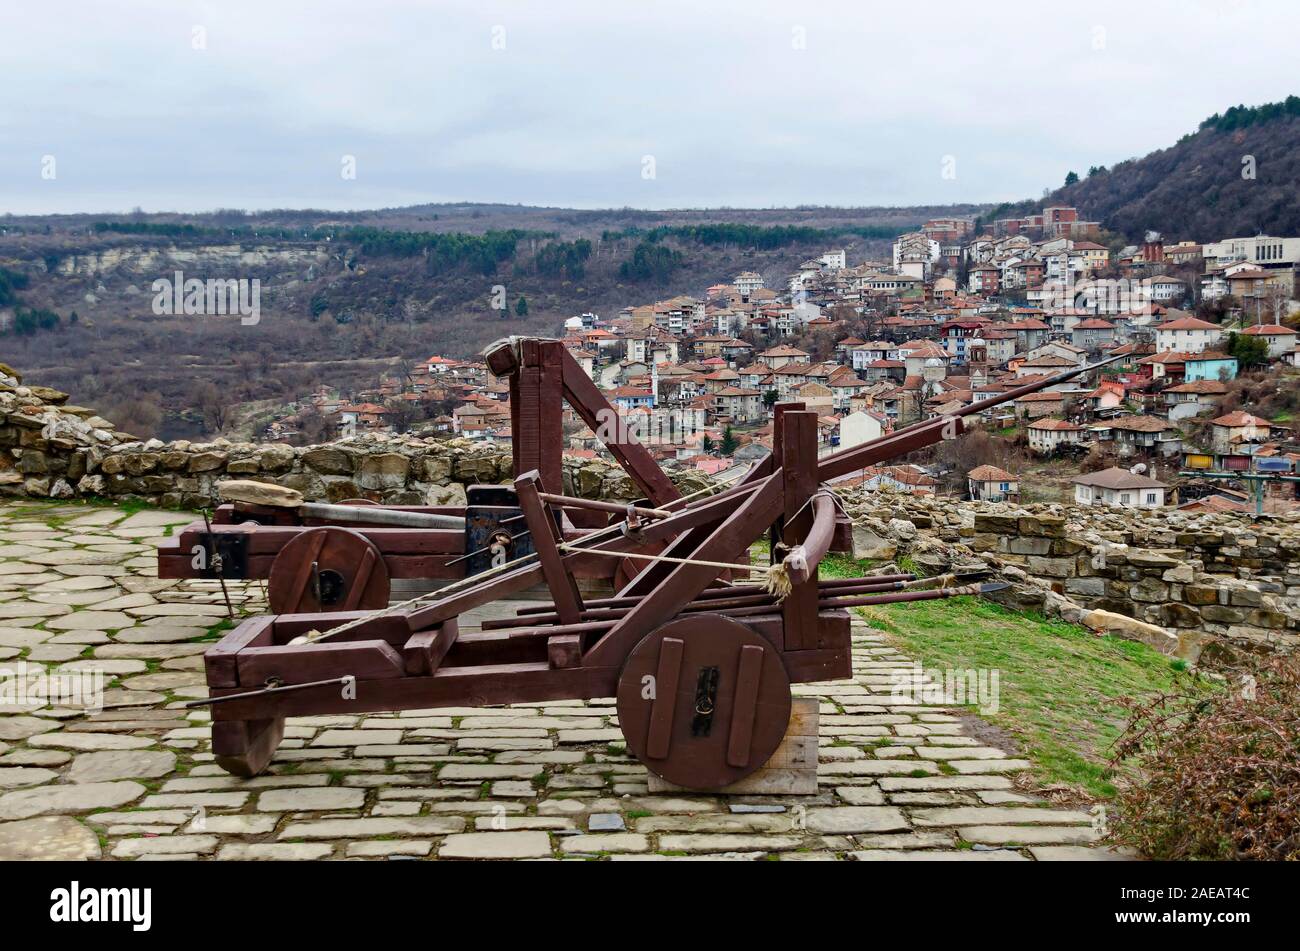 Ancient medieval wooden Crossbow and Catapult in Tsarevets fortress on a background residential neighborhood, Veliko Tarnovo, Bulgaria, Europe Stock Photo